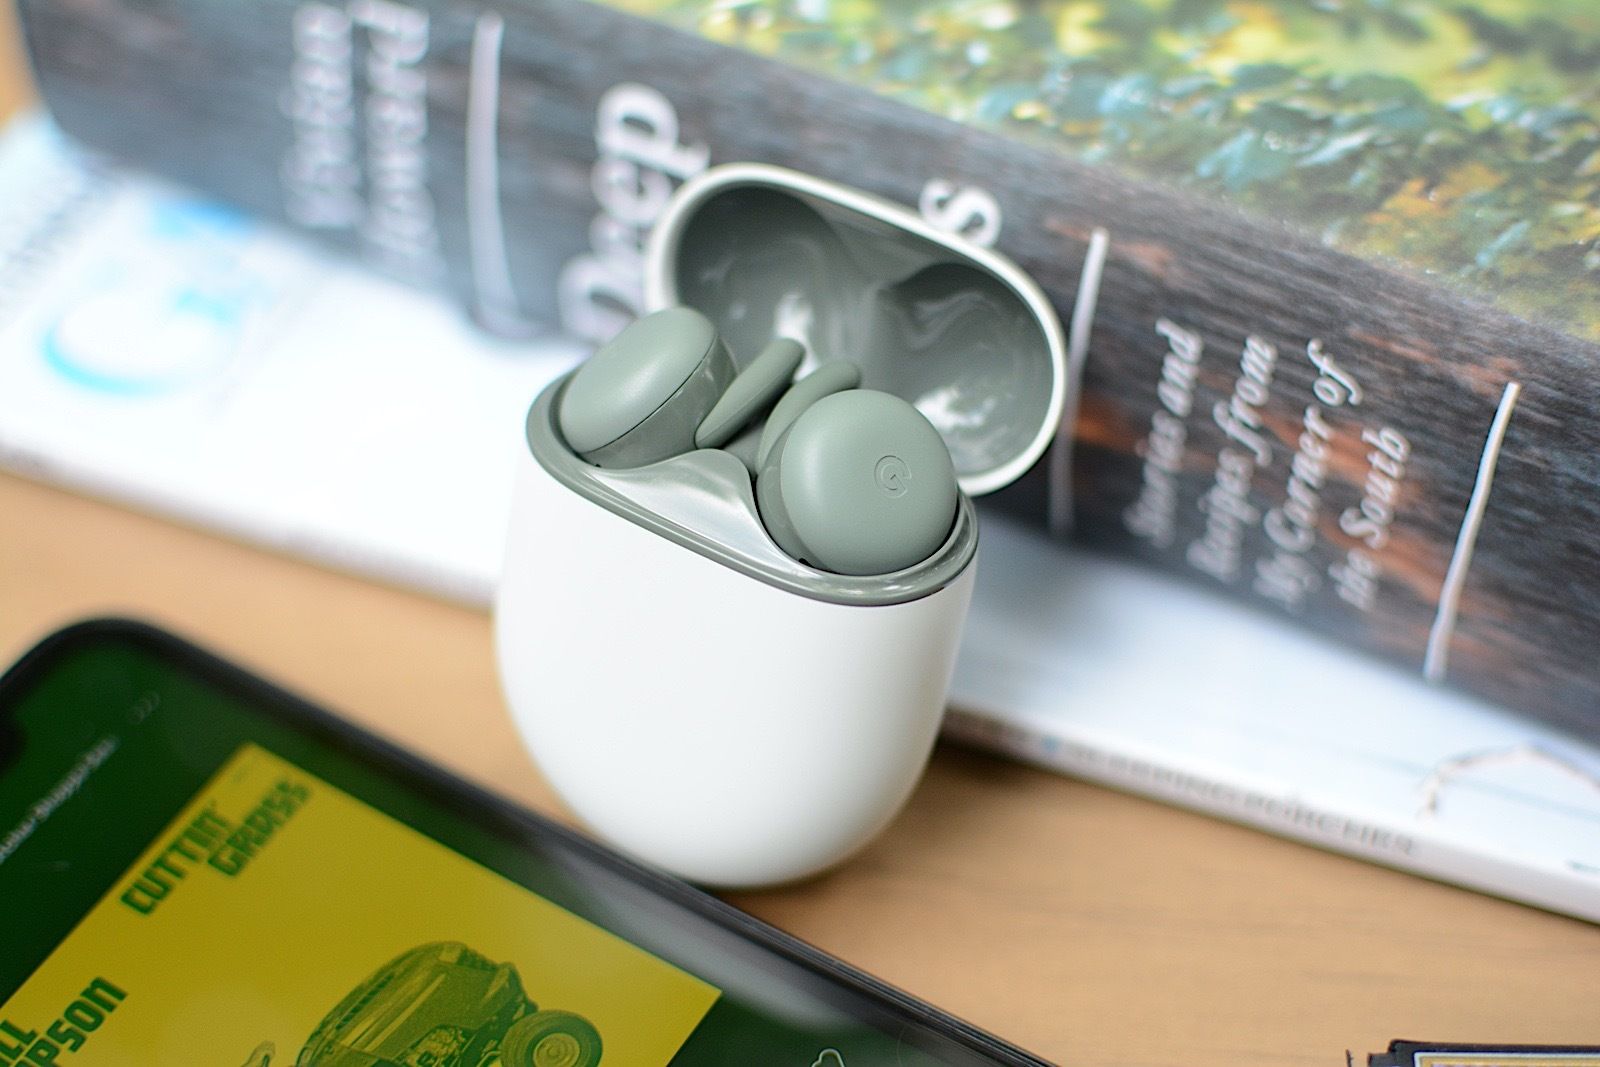 Auriculares Inalámbricos In-ear Google Pixel Buds A-series